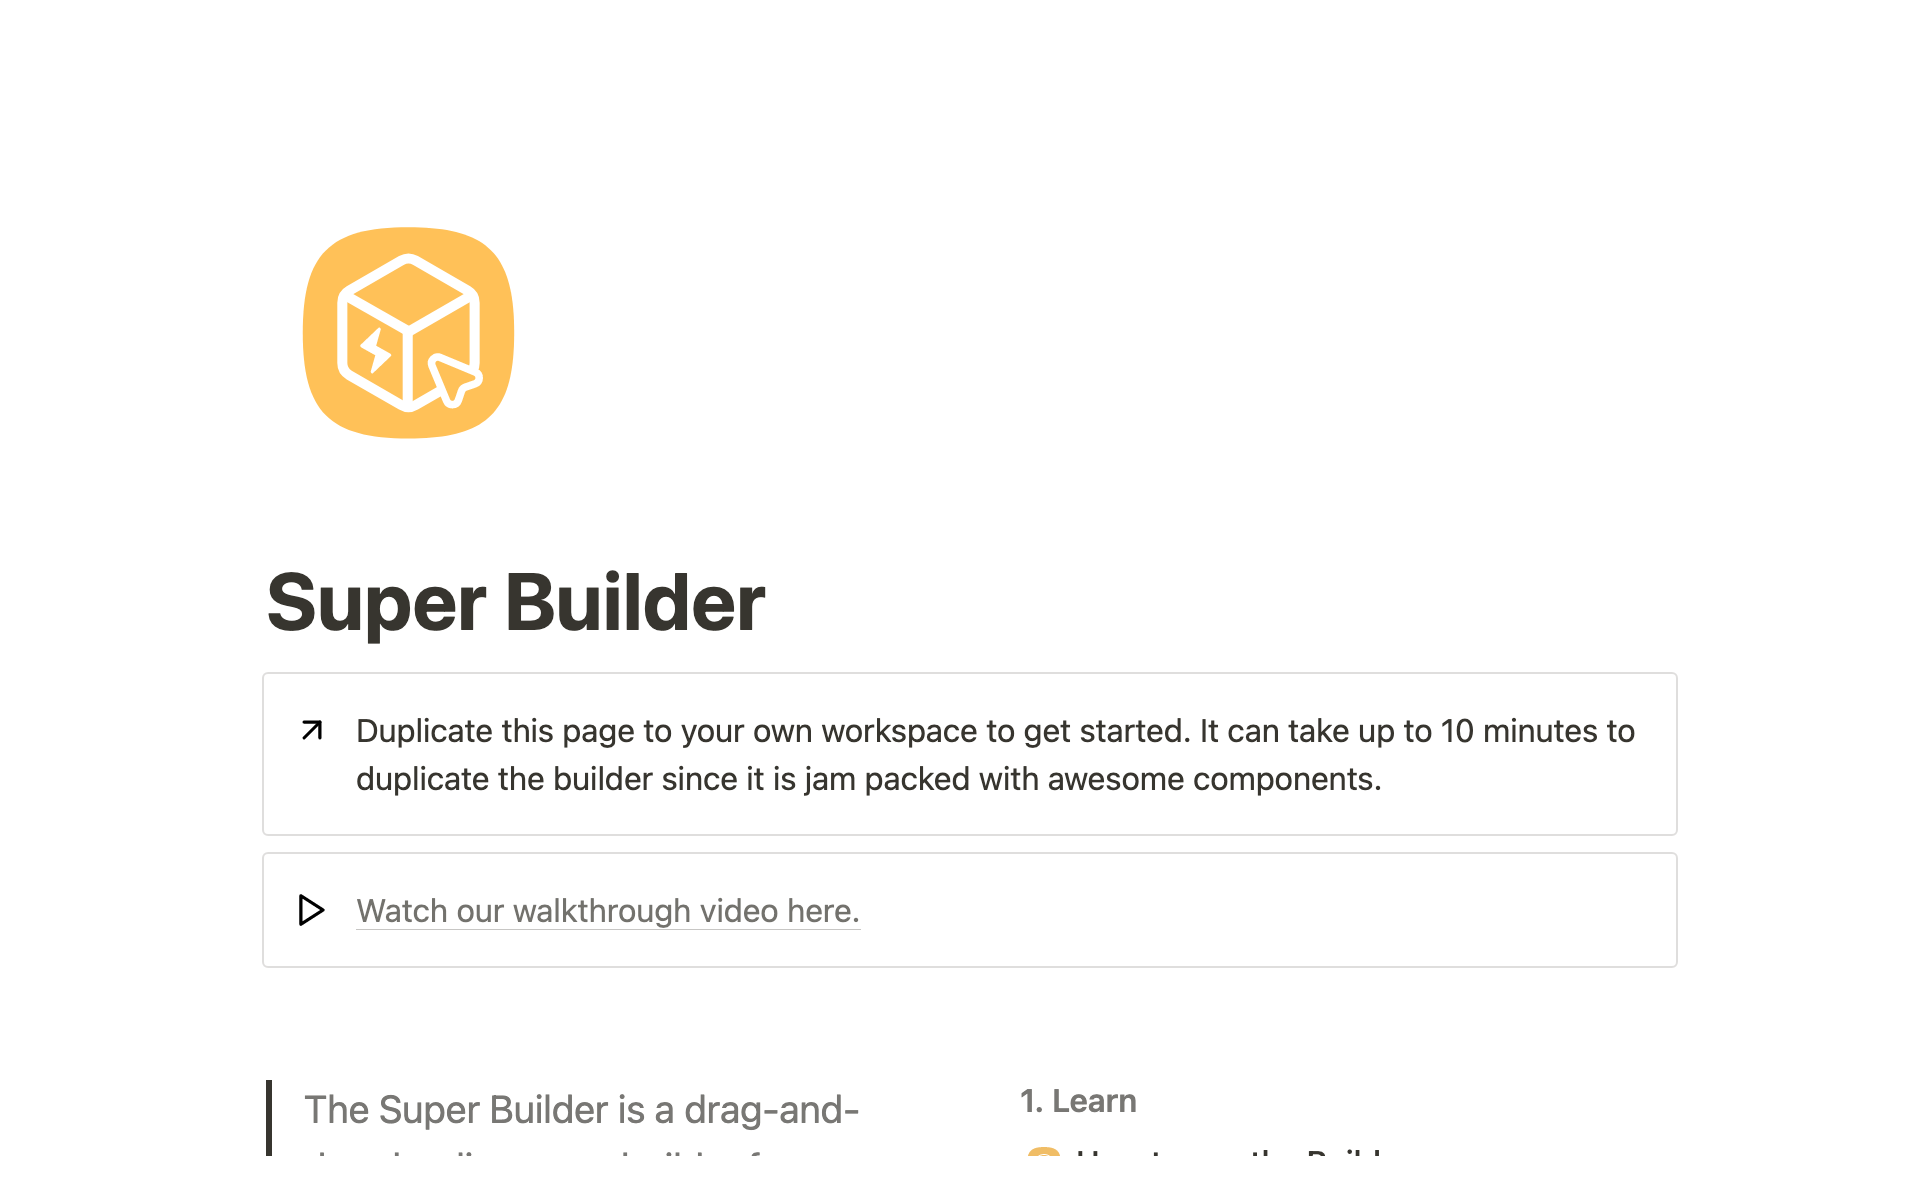 A library of drag & drop components for building websites in Notion.